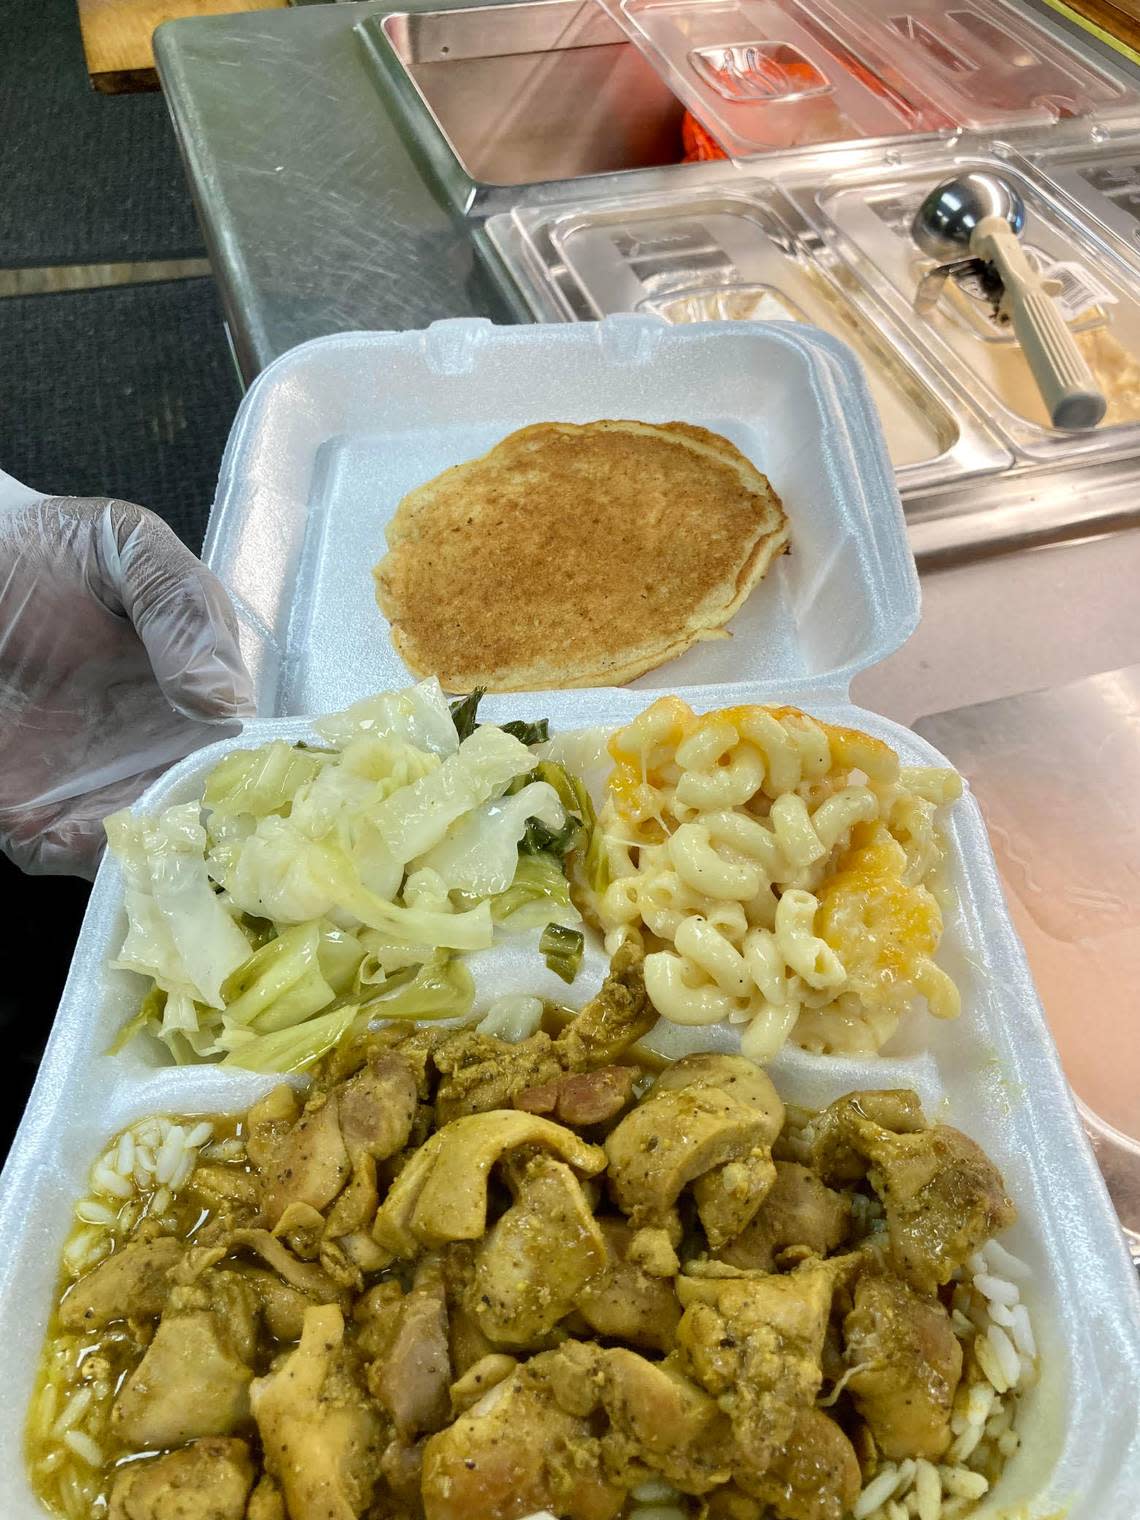 Chicken curry, mac and cheese, cabbage and hoe cake cornbread from Hunni BJ’s Foodbar, a new cafeteria-style Southern and Cajun food restaurant at 504 Russell Parkway in Warner Robins.